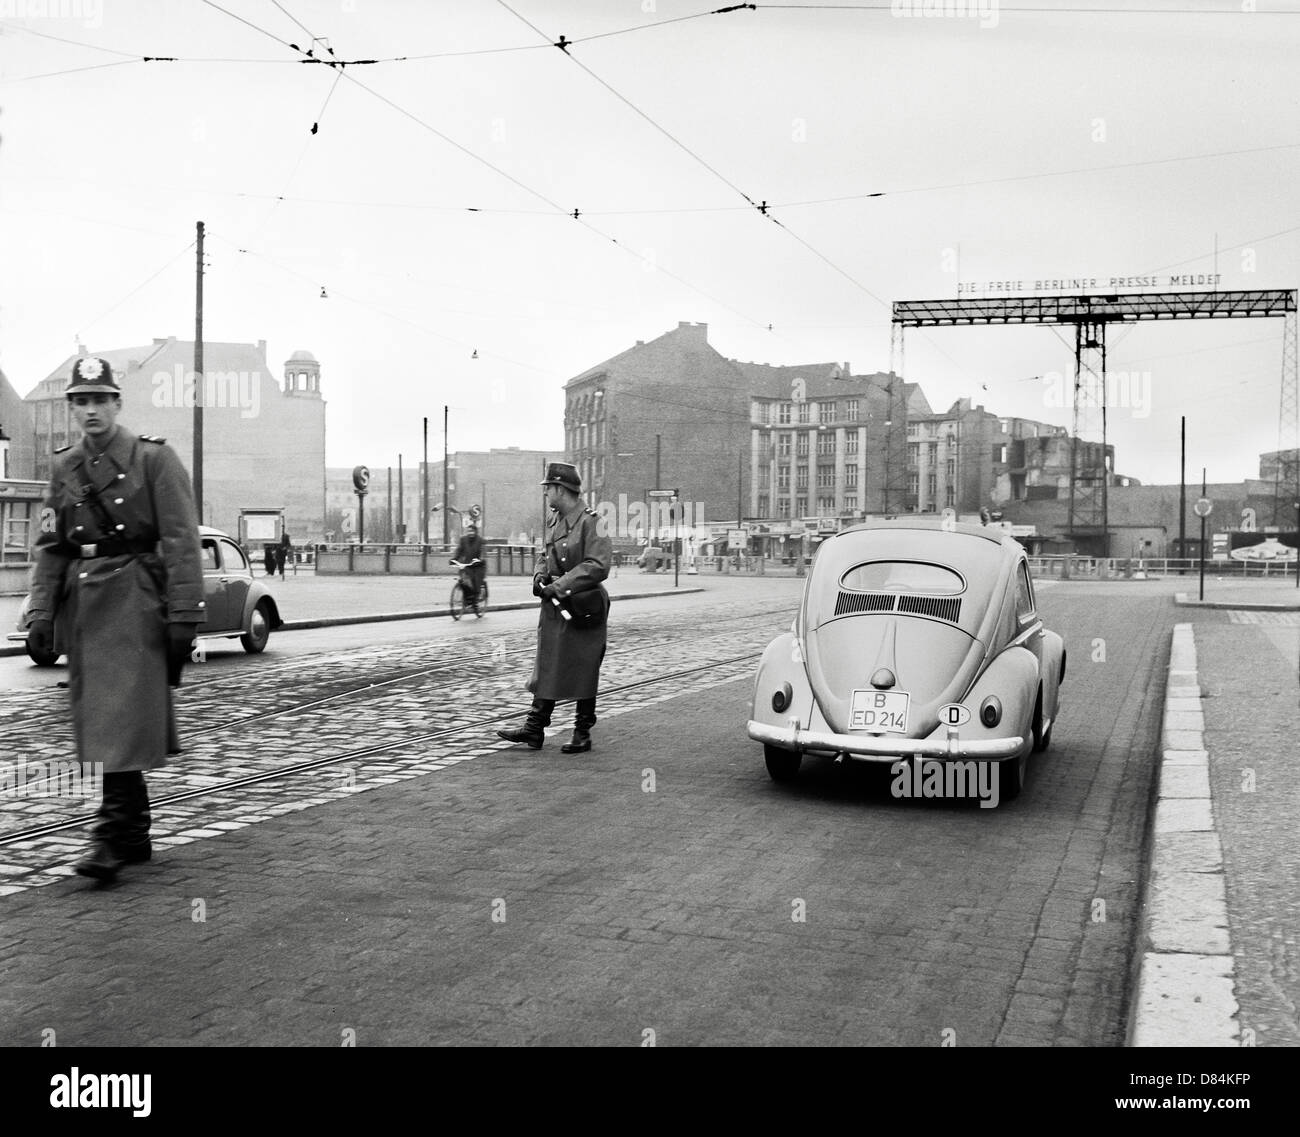 March 1959, 'Volkspolizei' Vopos East German police officers controlling cars at Leipziger Platz square, East Berlin, Germany, Europe Stock Photo